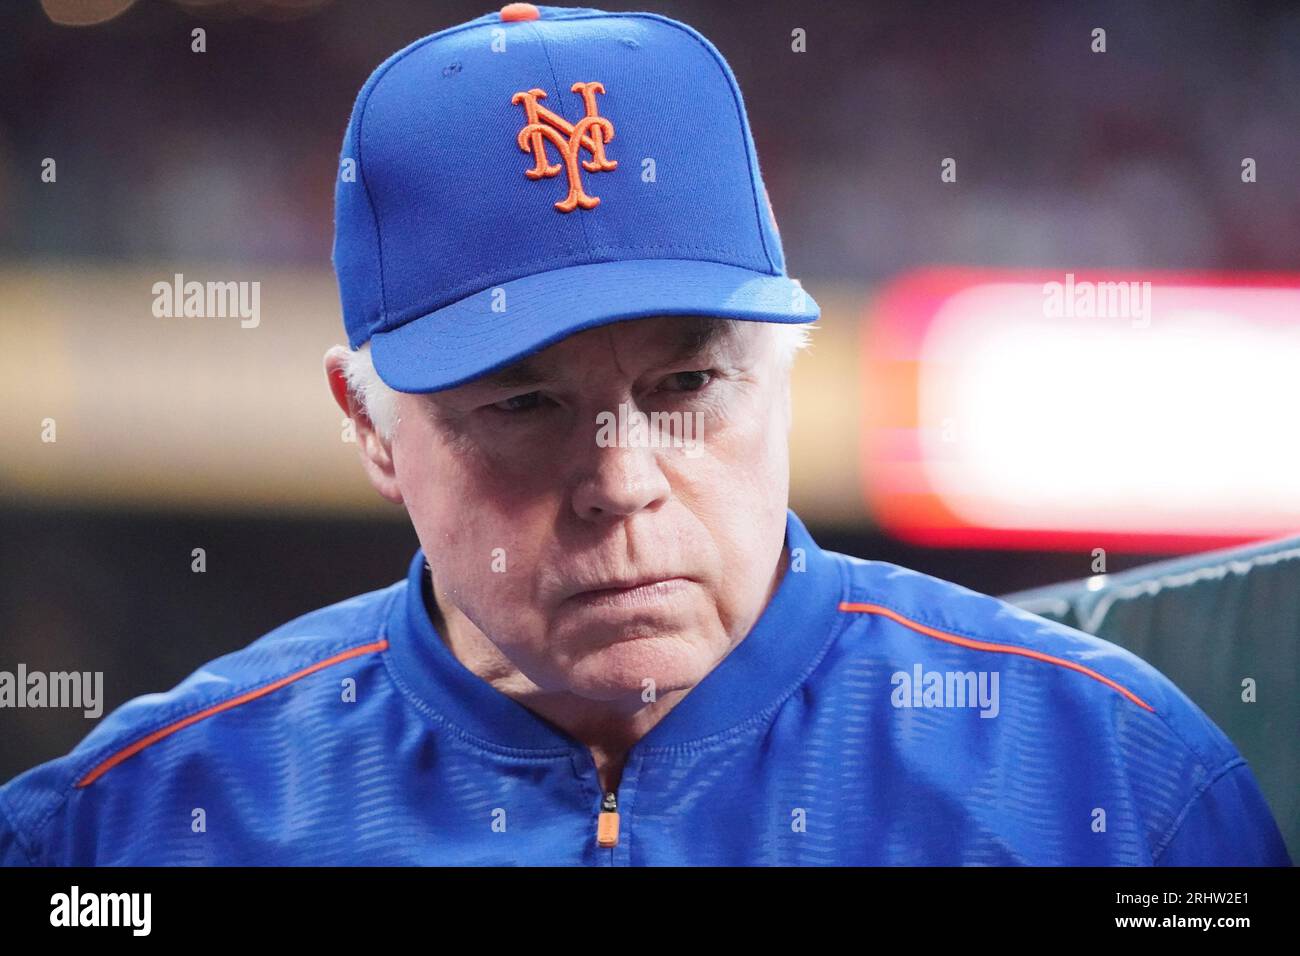 New York Mets Manager Buck Showalter waits in the dugout for a